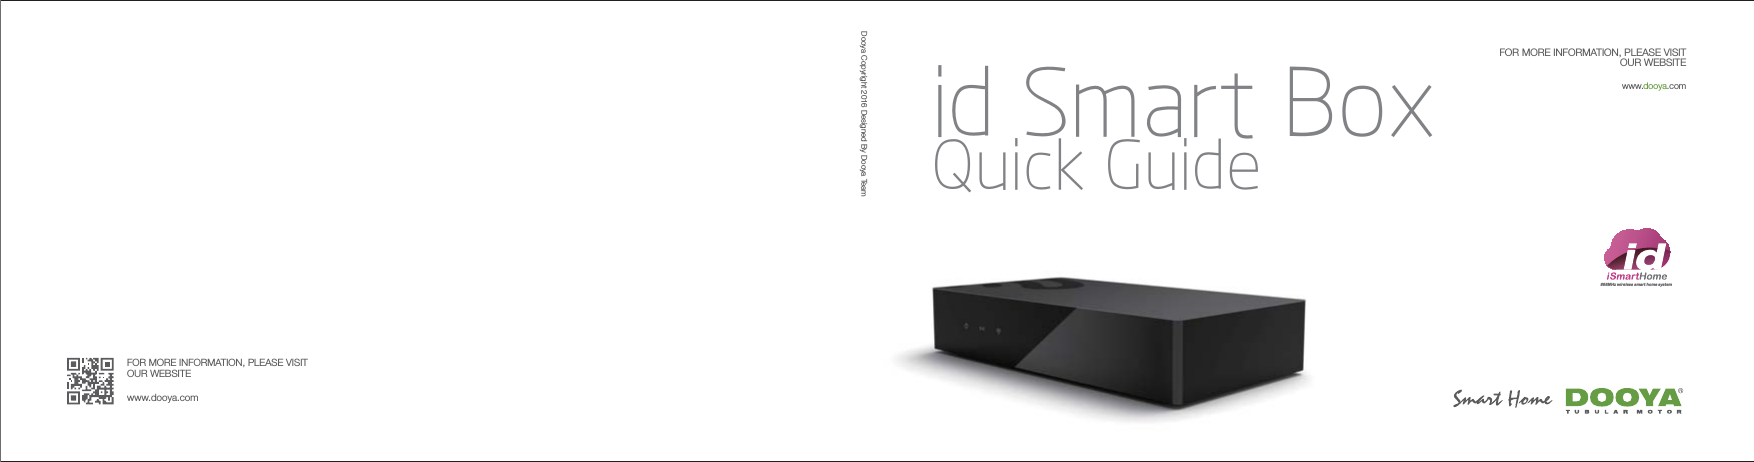 Quick Guideid Smart Box868MHz wireless smart home systemFOR MORE INFORMATION, PLEASE VISITOUR WEBSITEwww.dooya.comDooya Copyright 2016 Designed By Dooya TeamFOR MORE INFORMATION, PLEASE VISITOUR WEBSITEwww.dooya.com